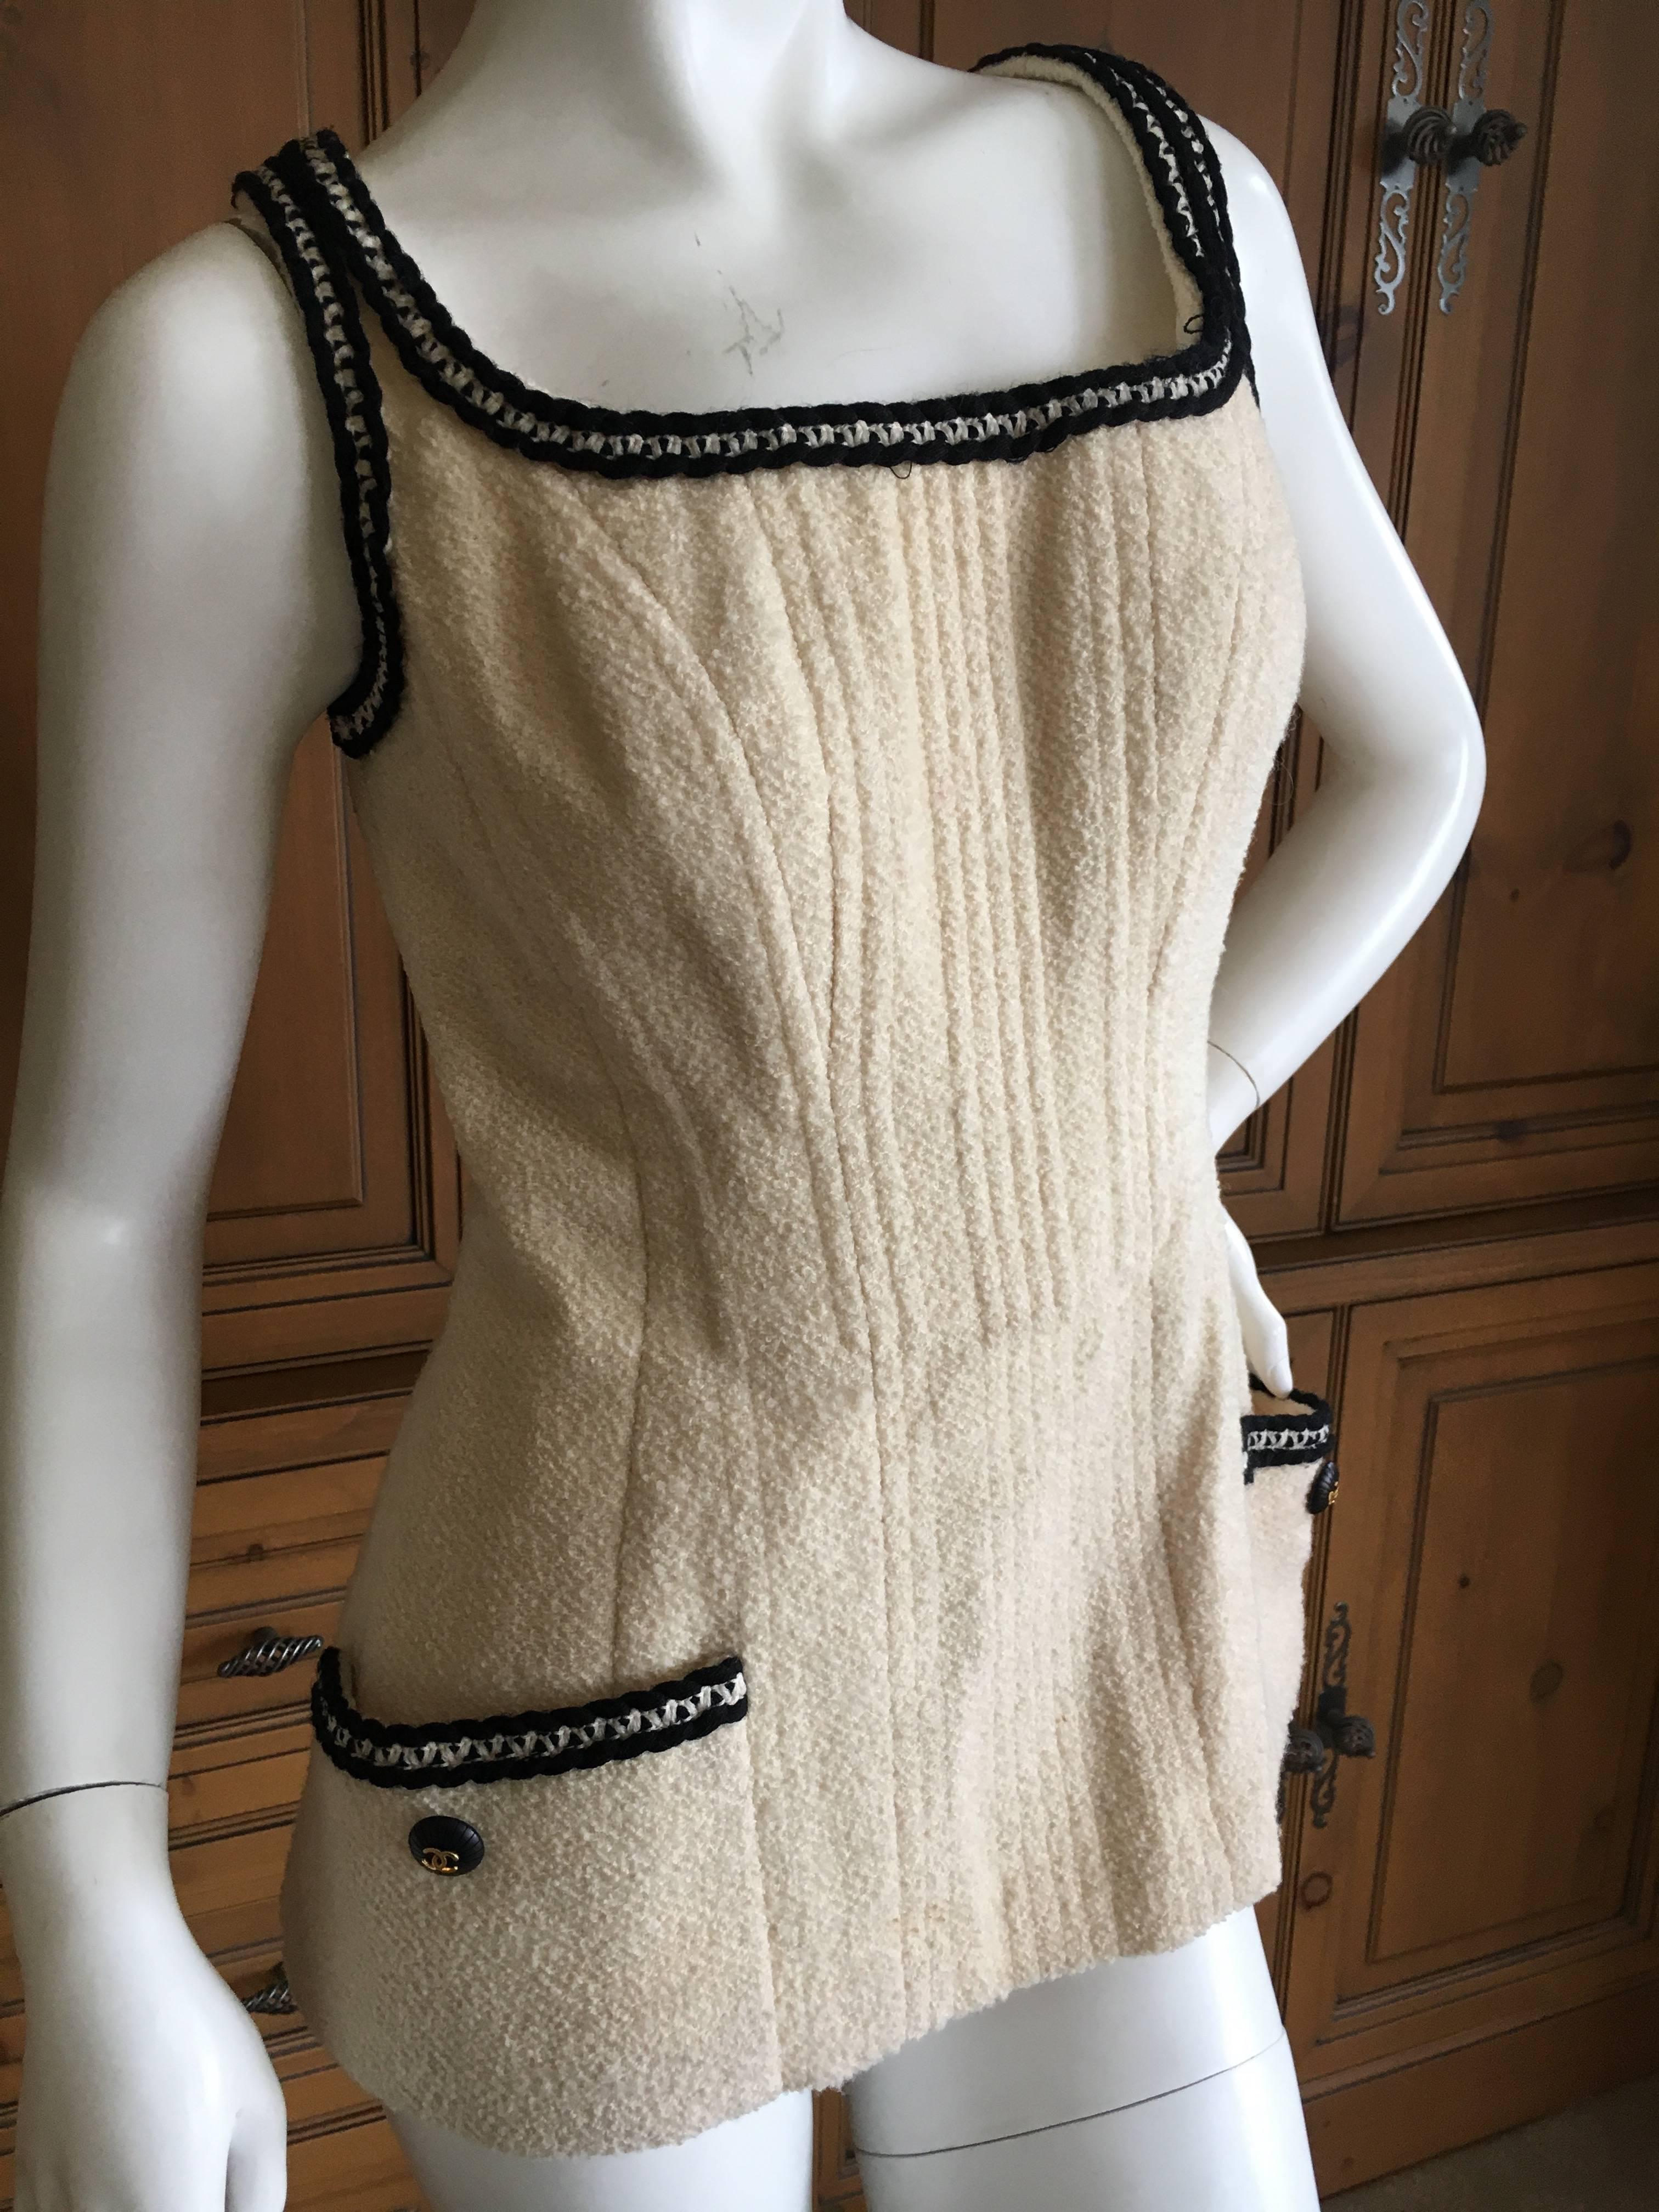 Chanel Vintage Sleeveless Ivory Boucle Top with Tweed Trim.
Zips up the back.
From Spring 1993
Size 42
Bust 38